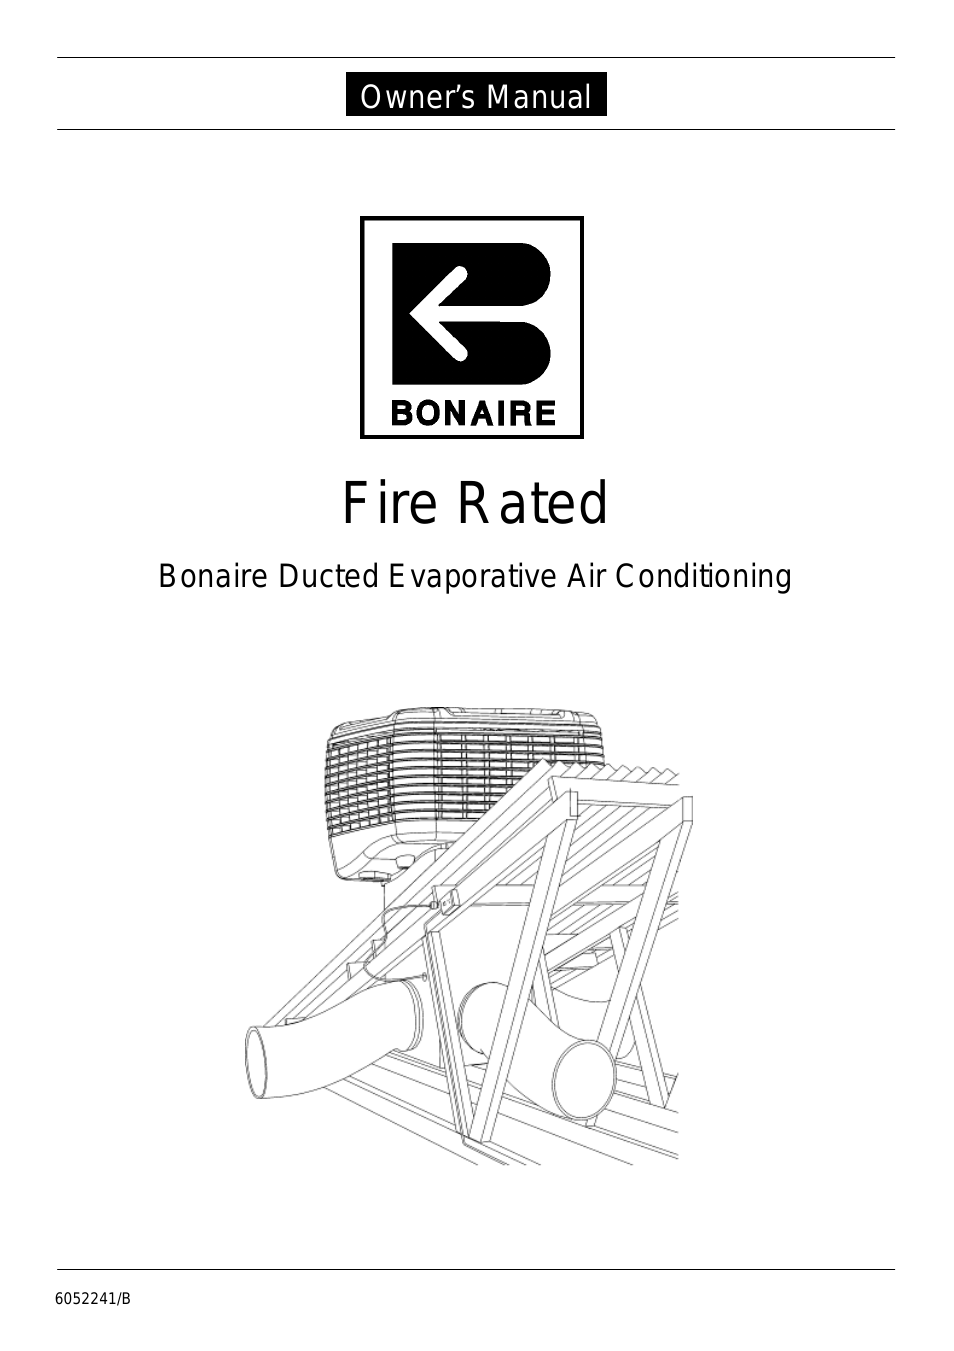 Fire Rated Domestic EAC